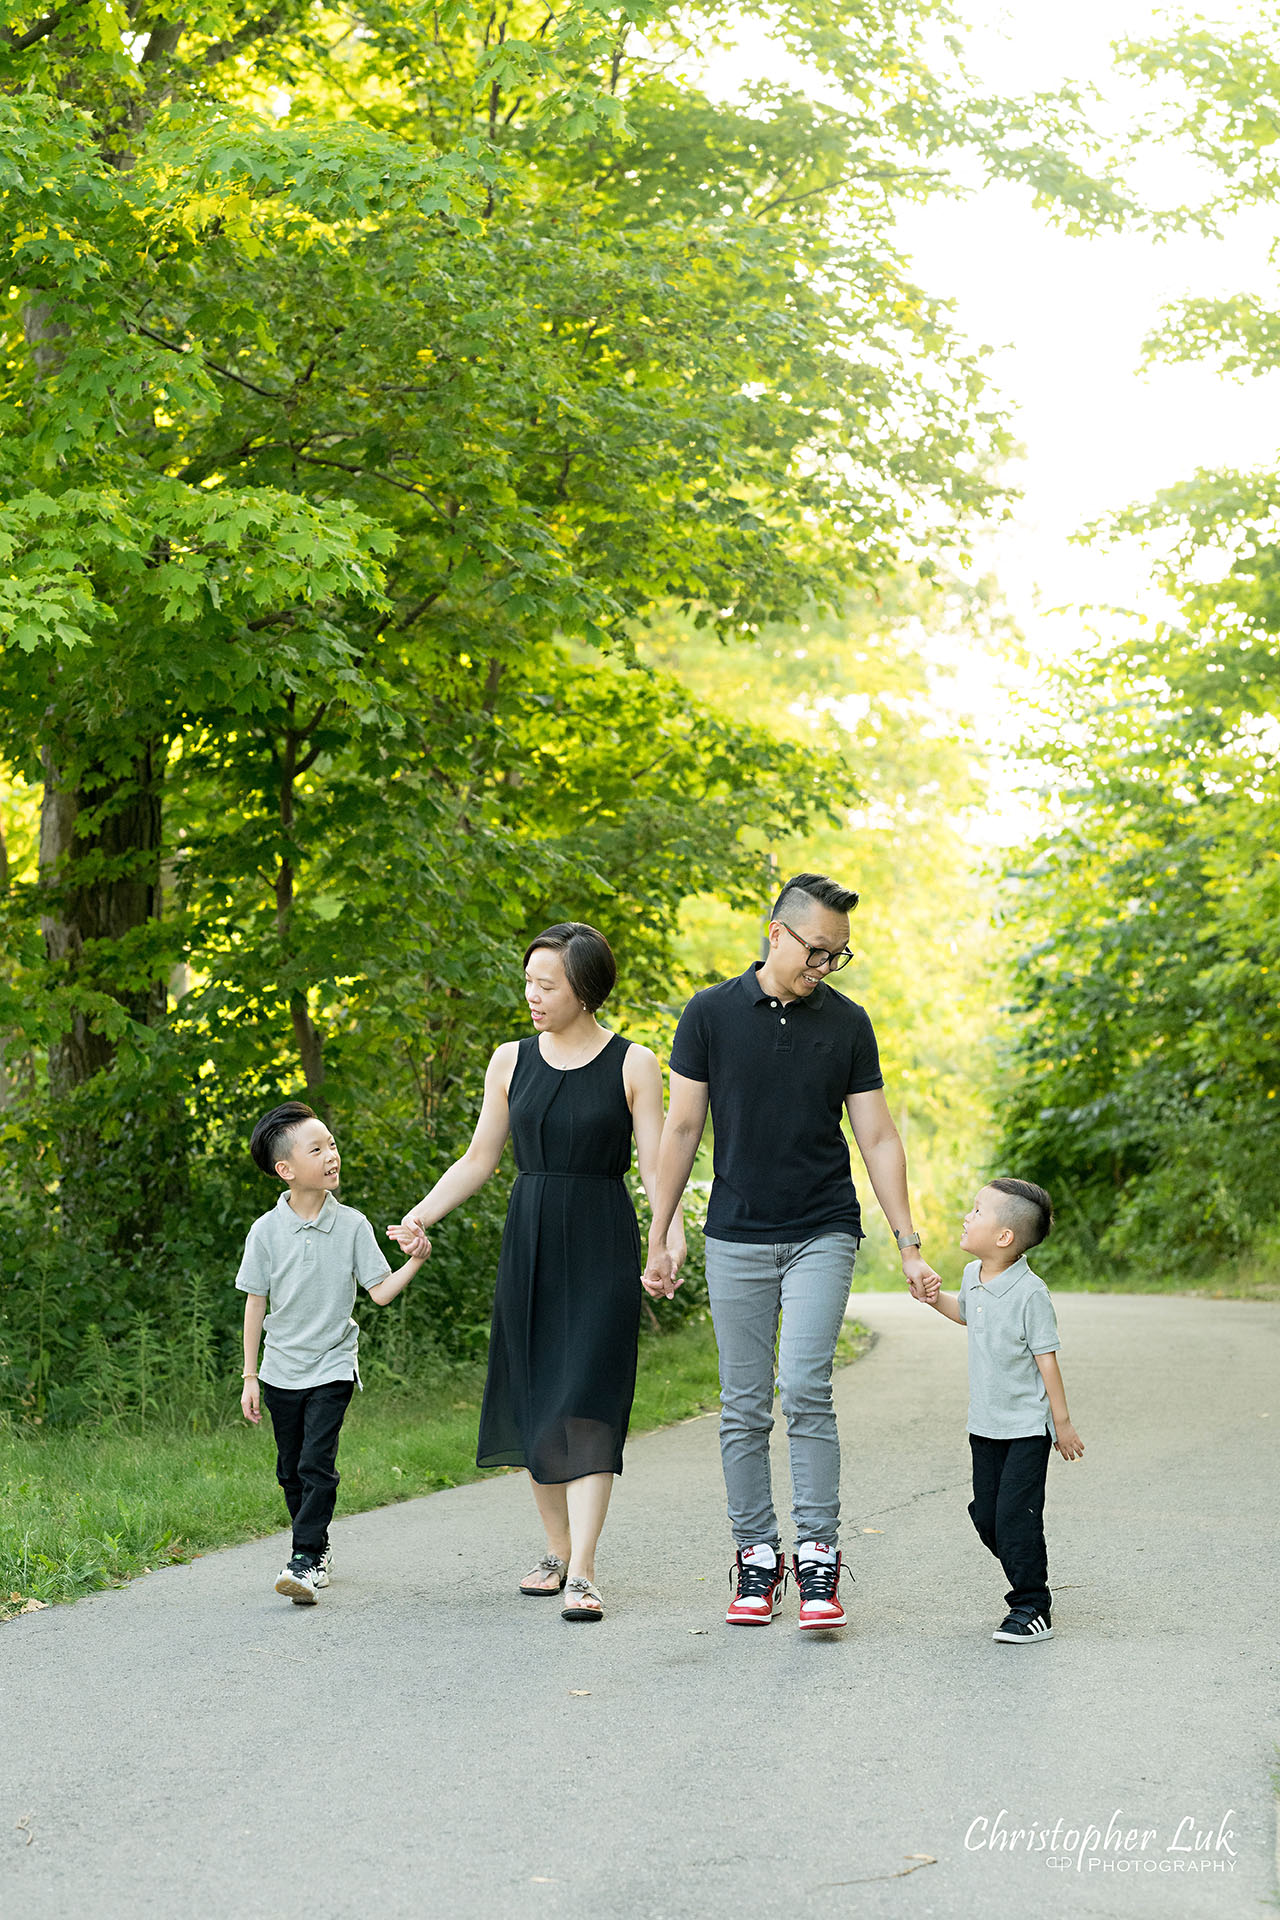 Toronto Woodbridge Vaughan Family Photographer Christopher Luk Candid Natural Photojournalistic Organic Happy Joyful Mother Father Children Sons Brothers Holding Hands Walking Together Portrait